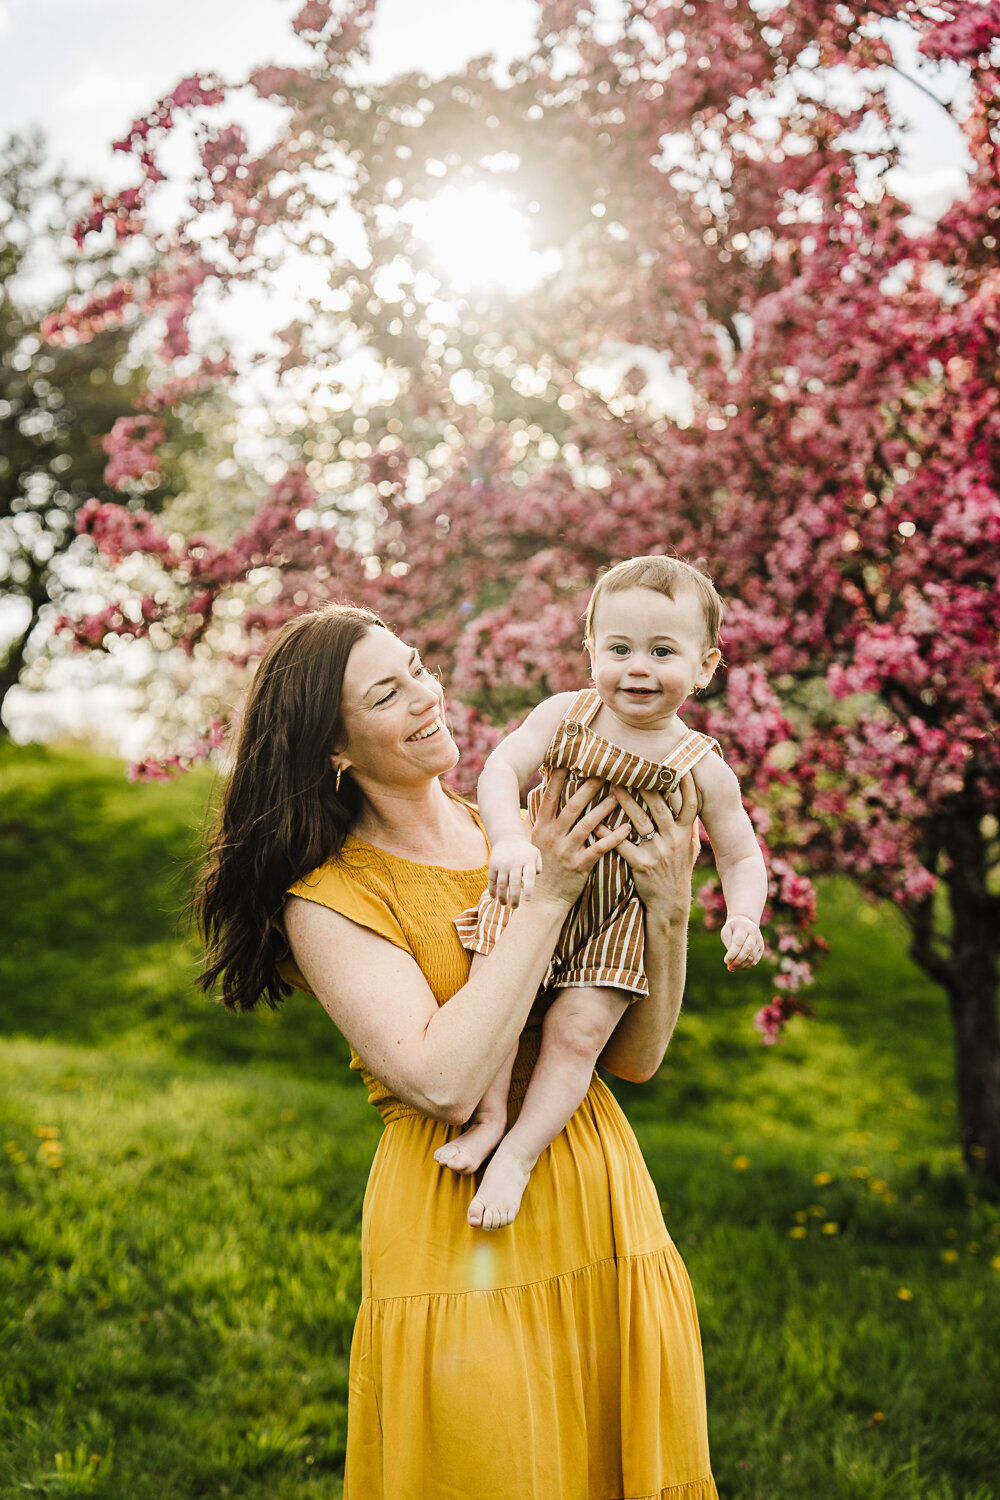 mom holds baby boy in overalls up in air at sunset with pink flowering trees